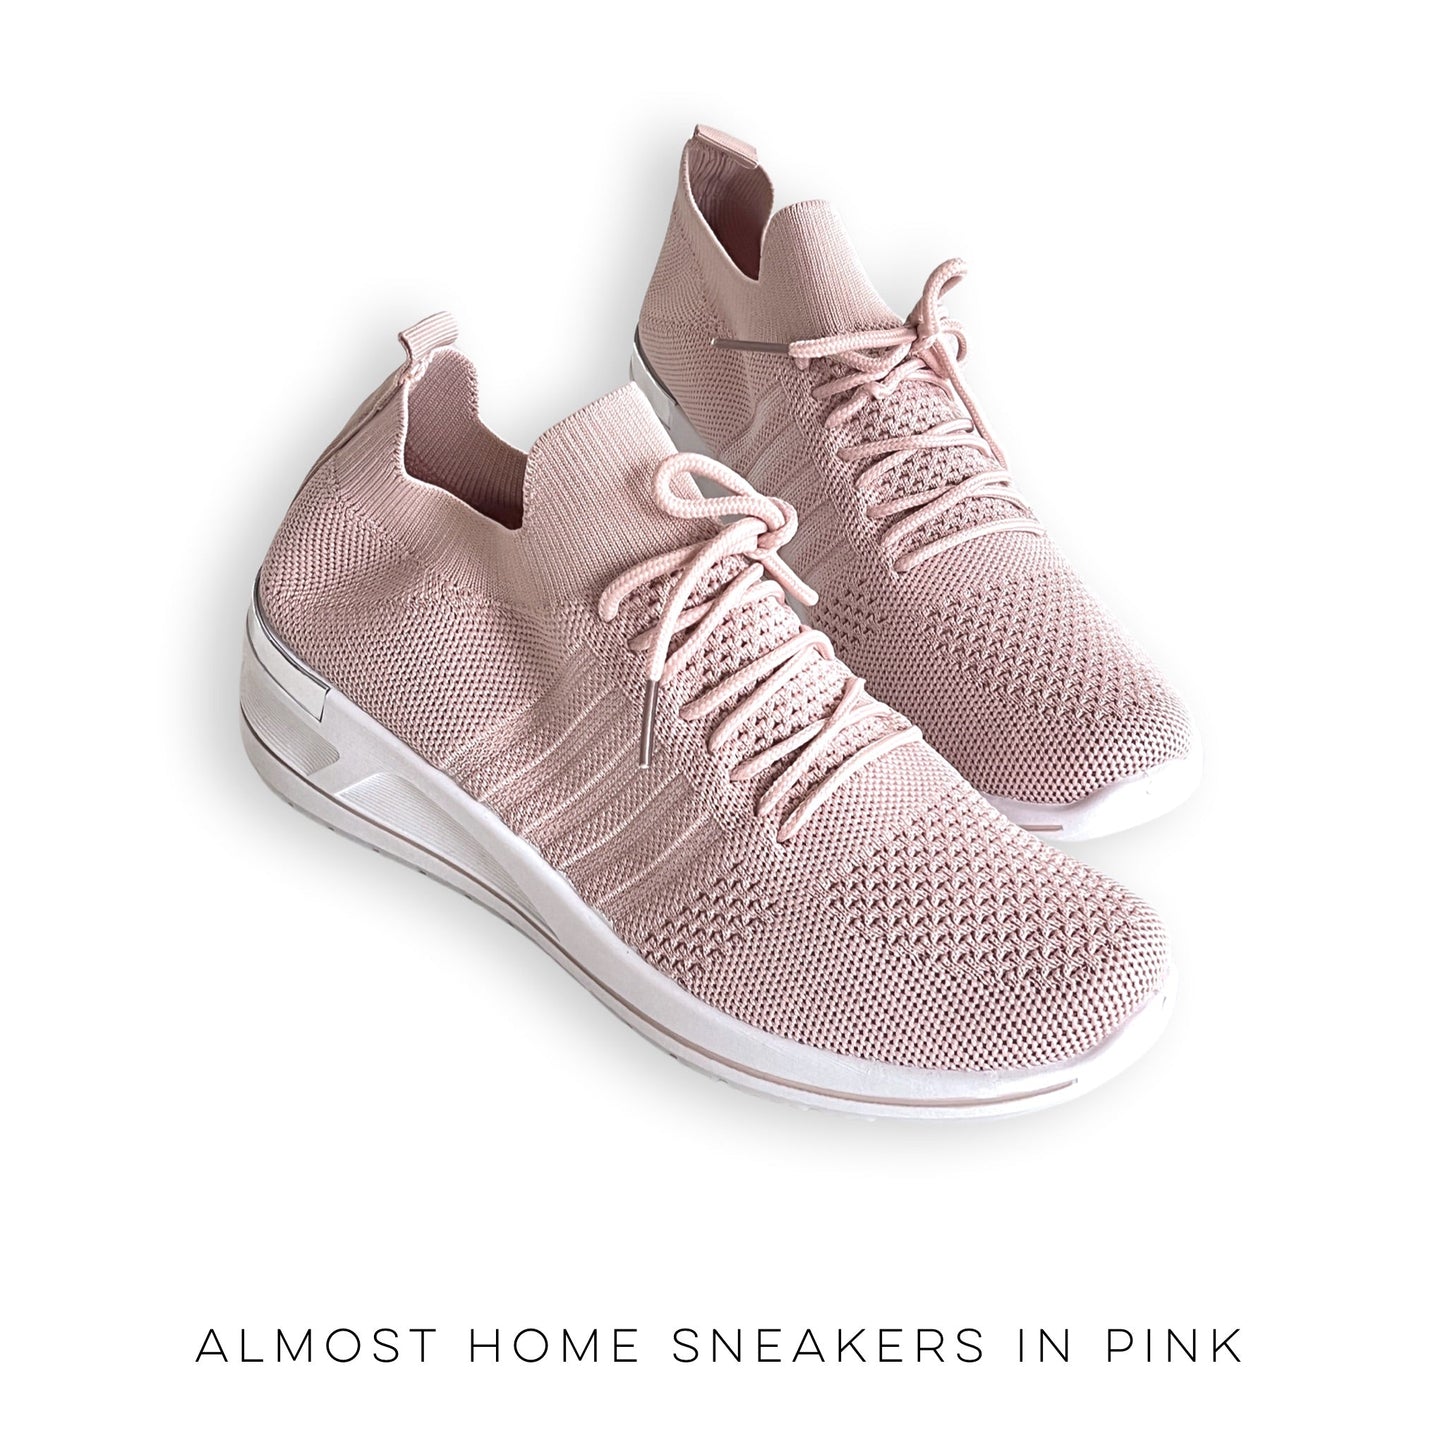 Almost Home Sneakers in Pink